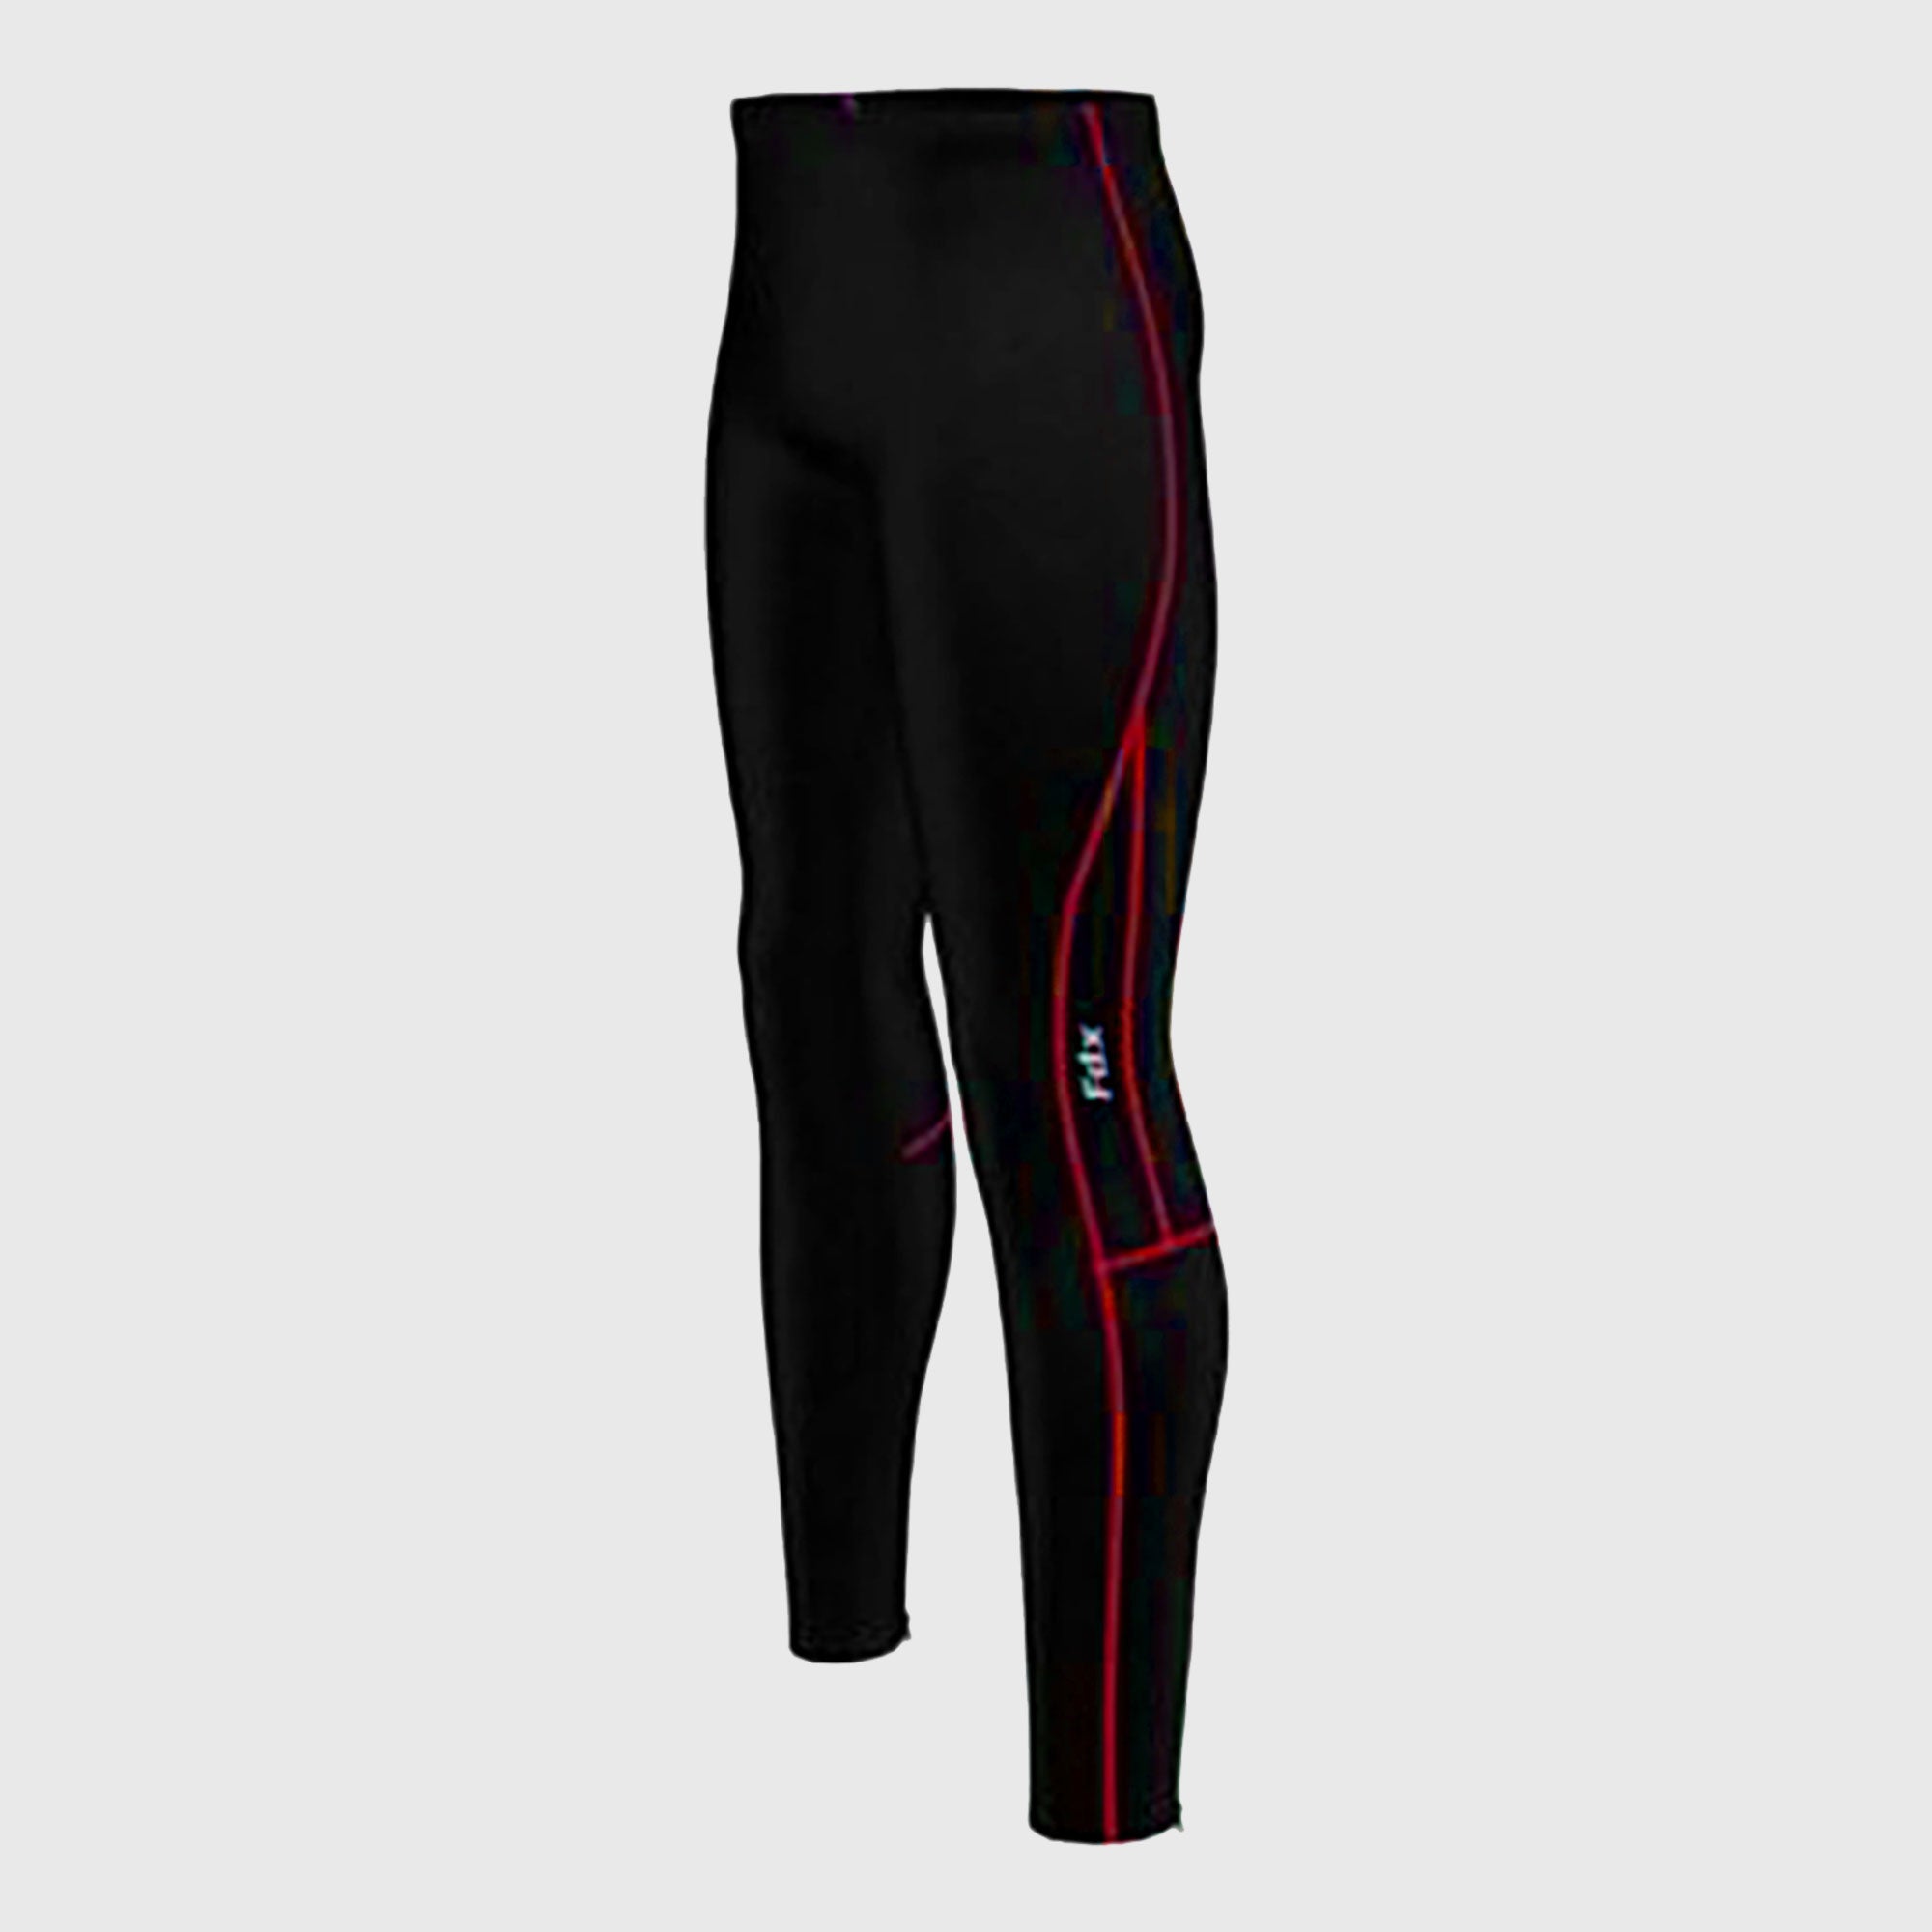 Fdx Heatchaser Red Men's Compression Winter Cycling Tights